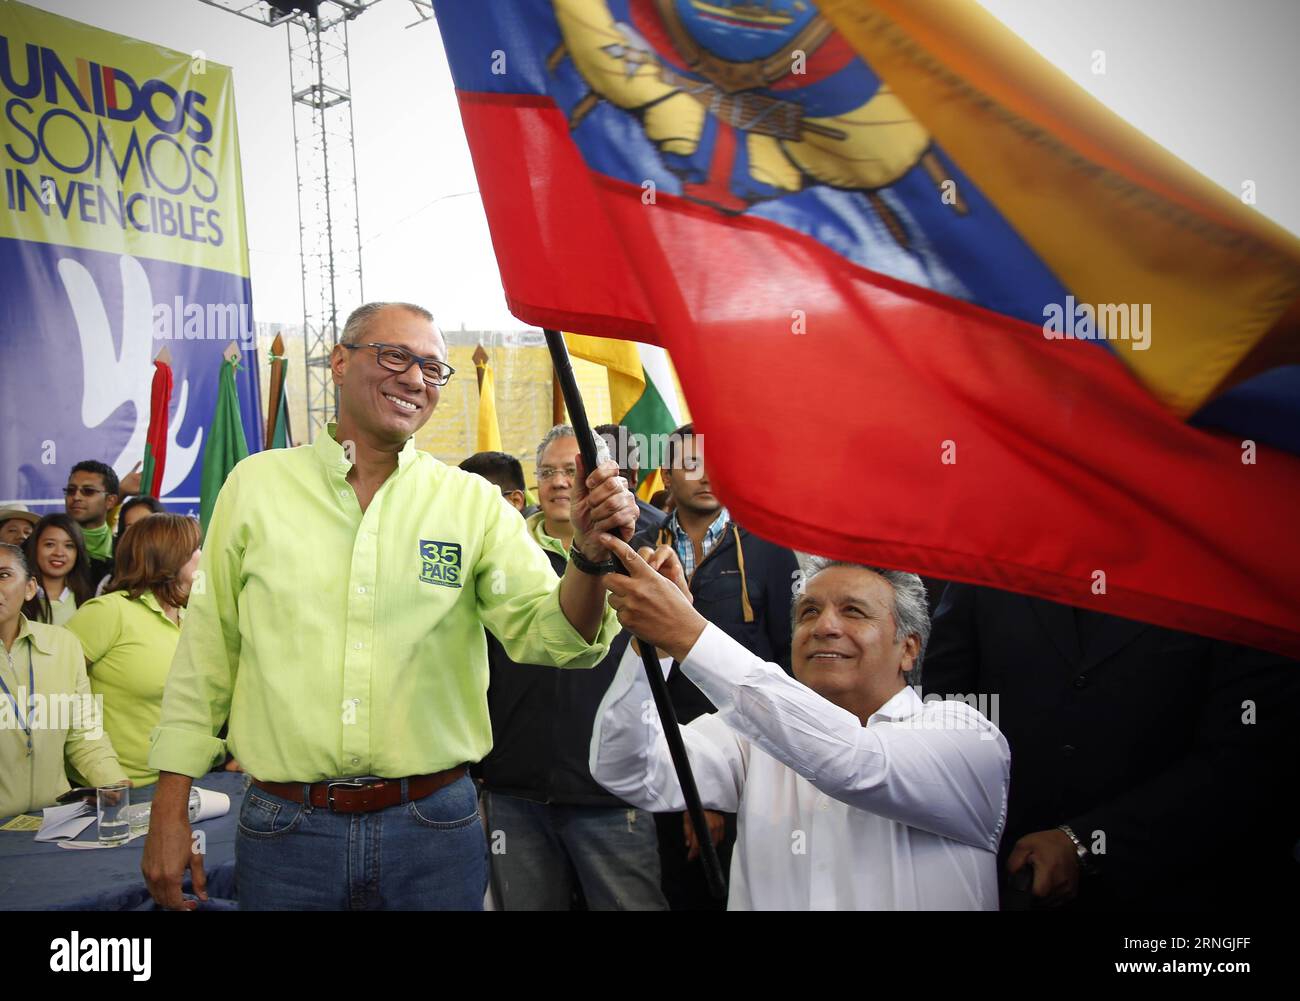 (161002) -- QUITO, Oct. 1, 2016 -- Ecuadorean Vice President Jorge Glas (L) and former Vice President Lenin Moreno (R) take part in the National Convention of the ruling PAIS Alliance Movement in Quito, Ecuador, on Oct. 1, 2016. The PAIS Alliance Movement on Saturday declared Lenin Moreno as presidential candidate for the next general election. ) (zy) ECUADOR-QUITO-RULING PARTY-PRESIDENTIAL CANDIDATE SantiagoxArmas PUBLICATIONxNOTxINxCHN   Quito OCT 1 2016 Ecuadorean Vice President Jorge Glass l and Former Vice President Lenin Moreno r Take Part in The National Convention of The ruling Pais Al Stock Photo